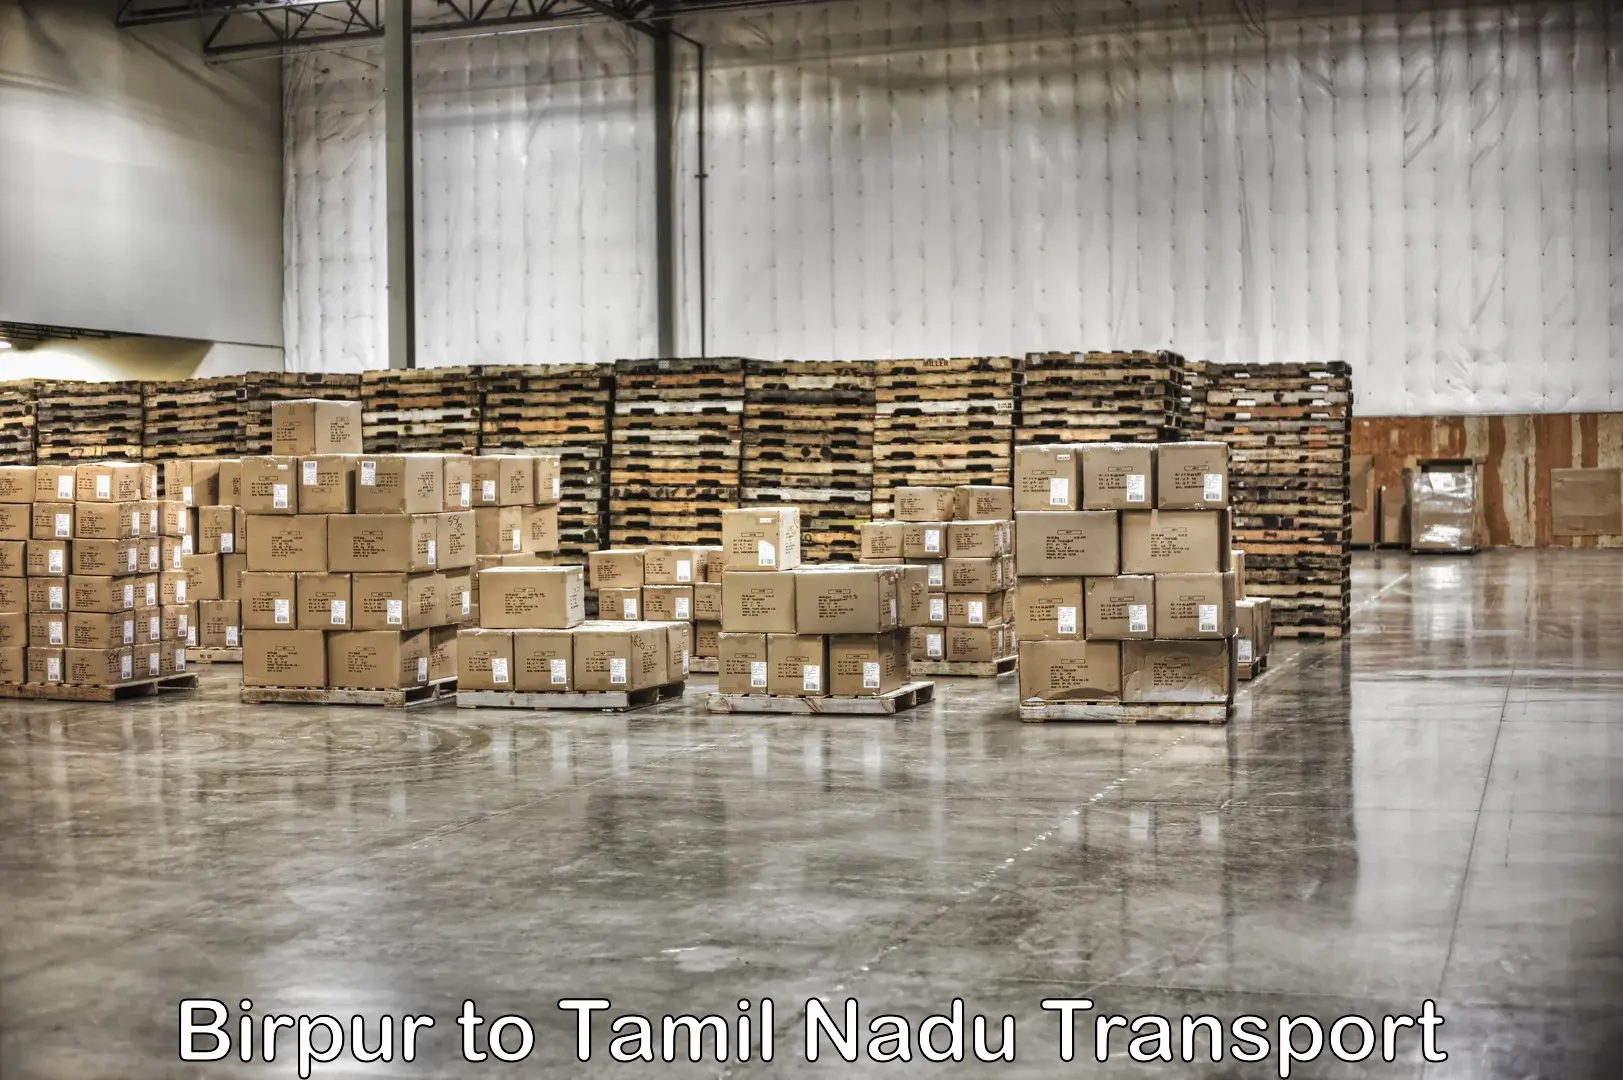 Best transport services in India Birpur to Chennai